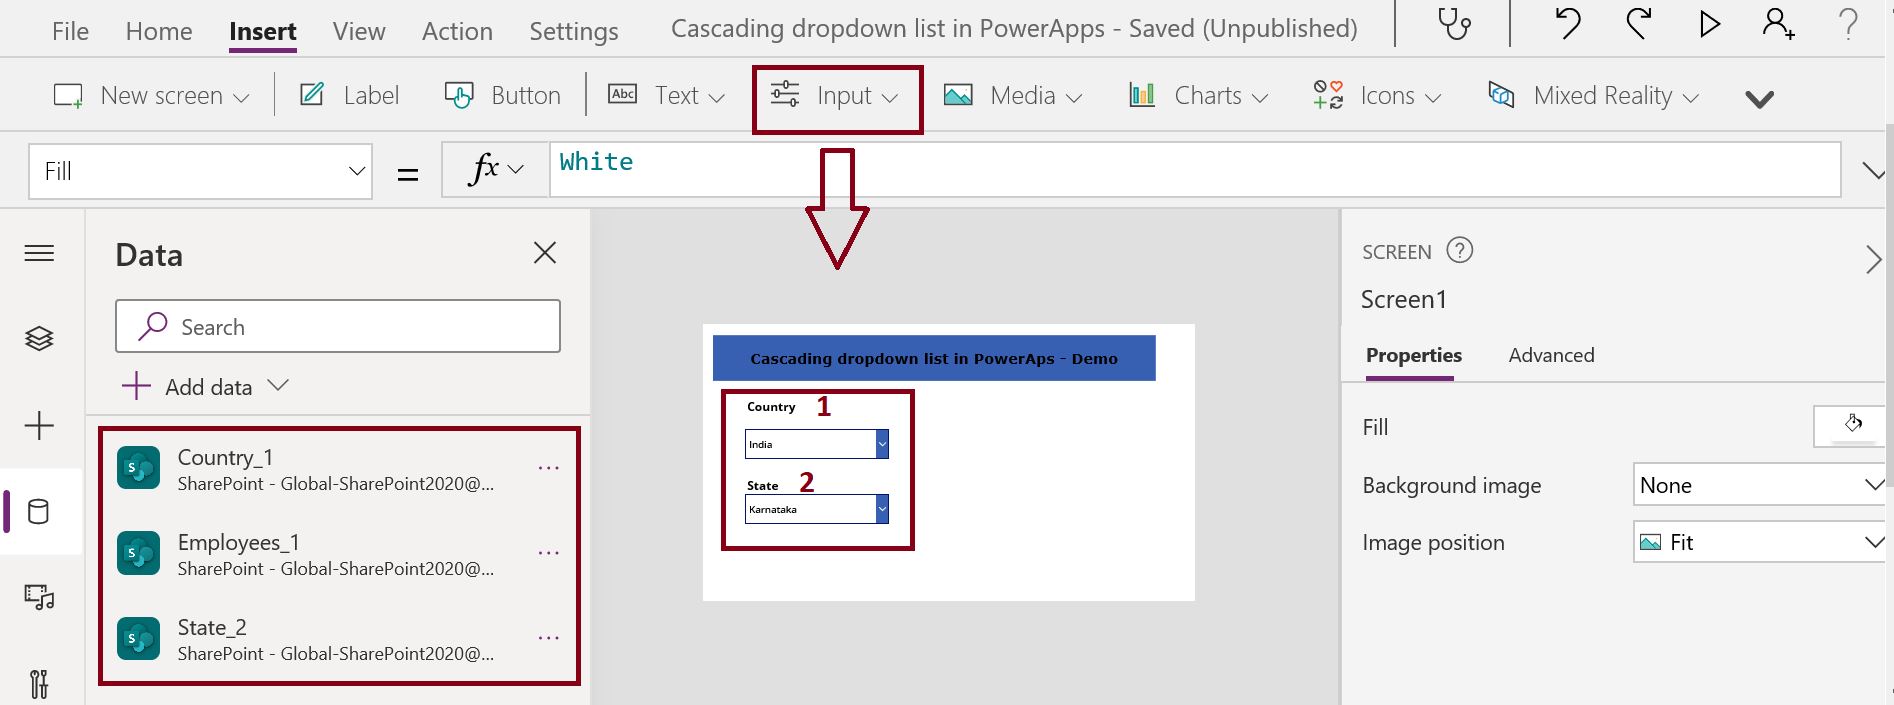 Design the dependent dropdown list canvas app in PowerApps